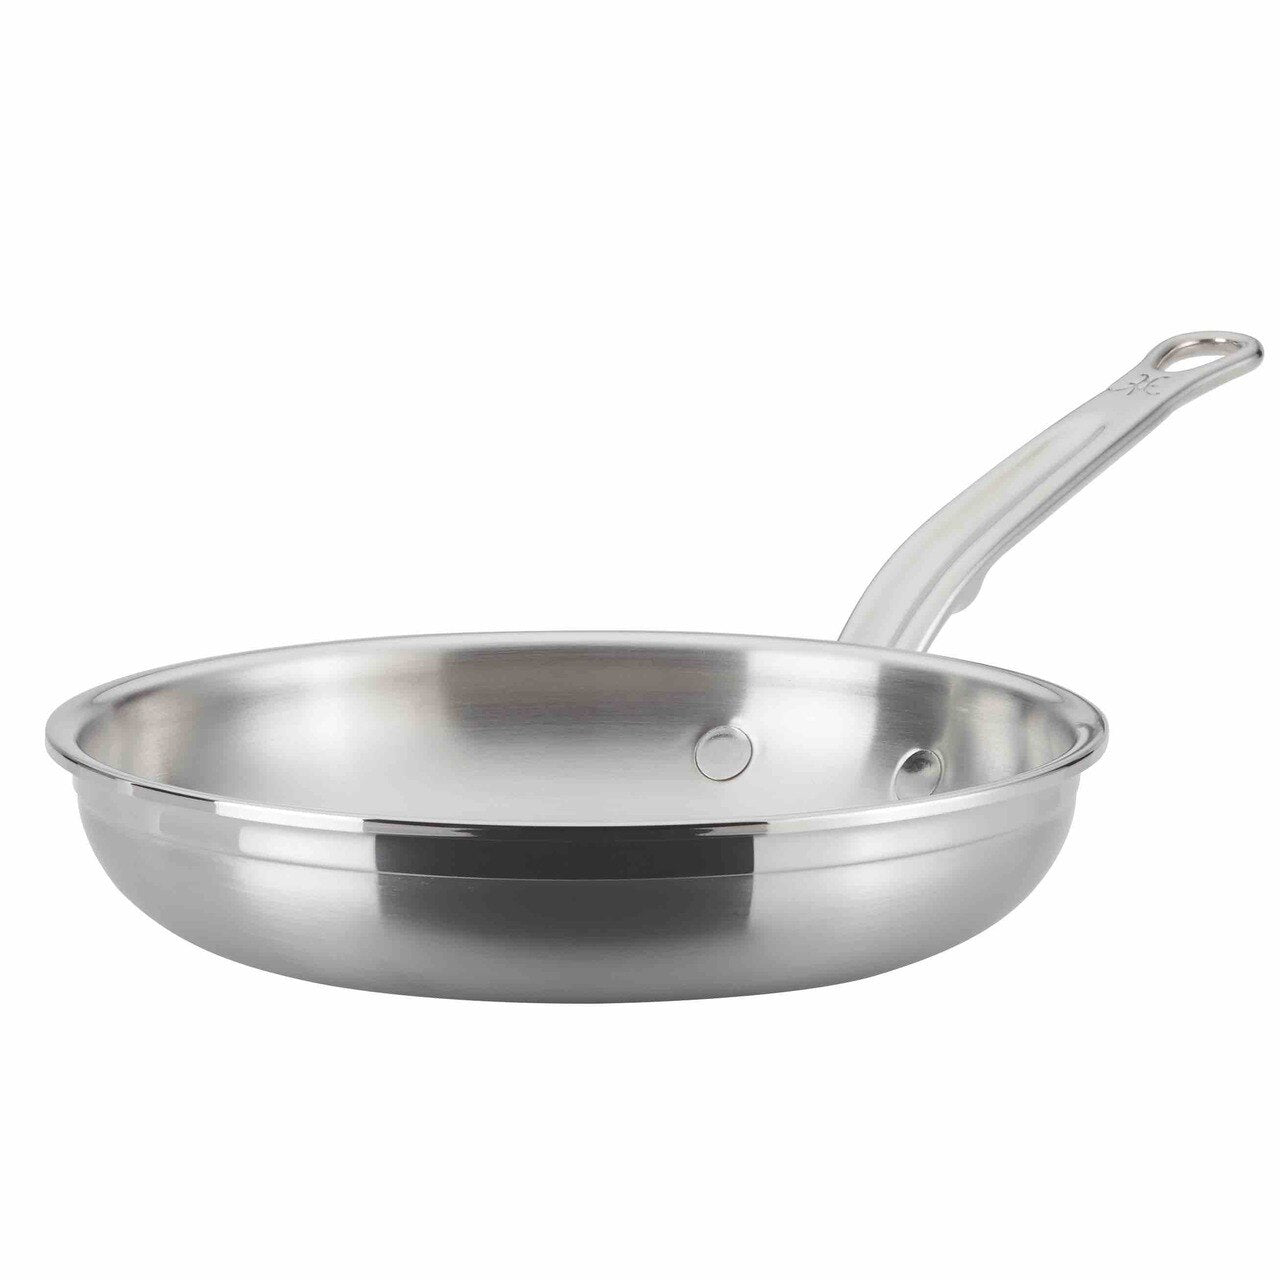 Hestan Induction Stainless Steel Skillets: Three Sizes